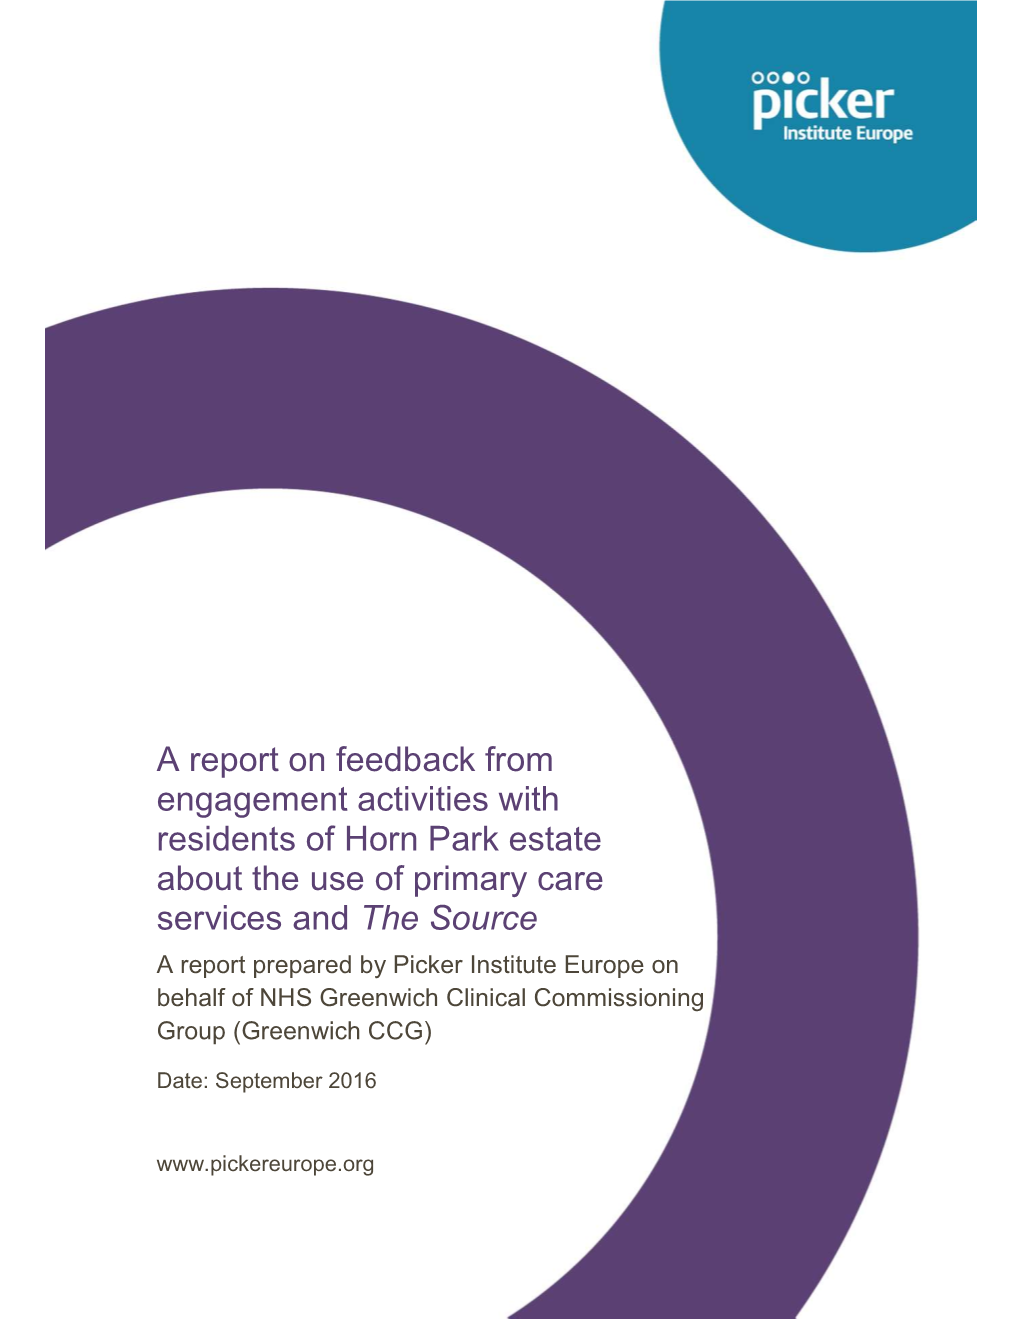 A Report on Feedback from Engagement Activities With